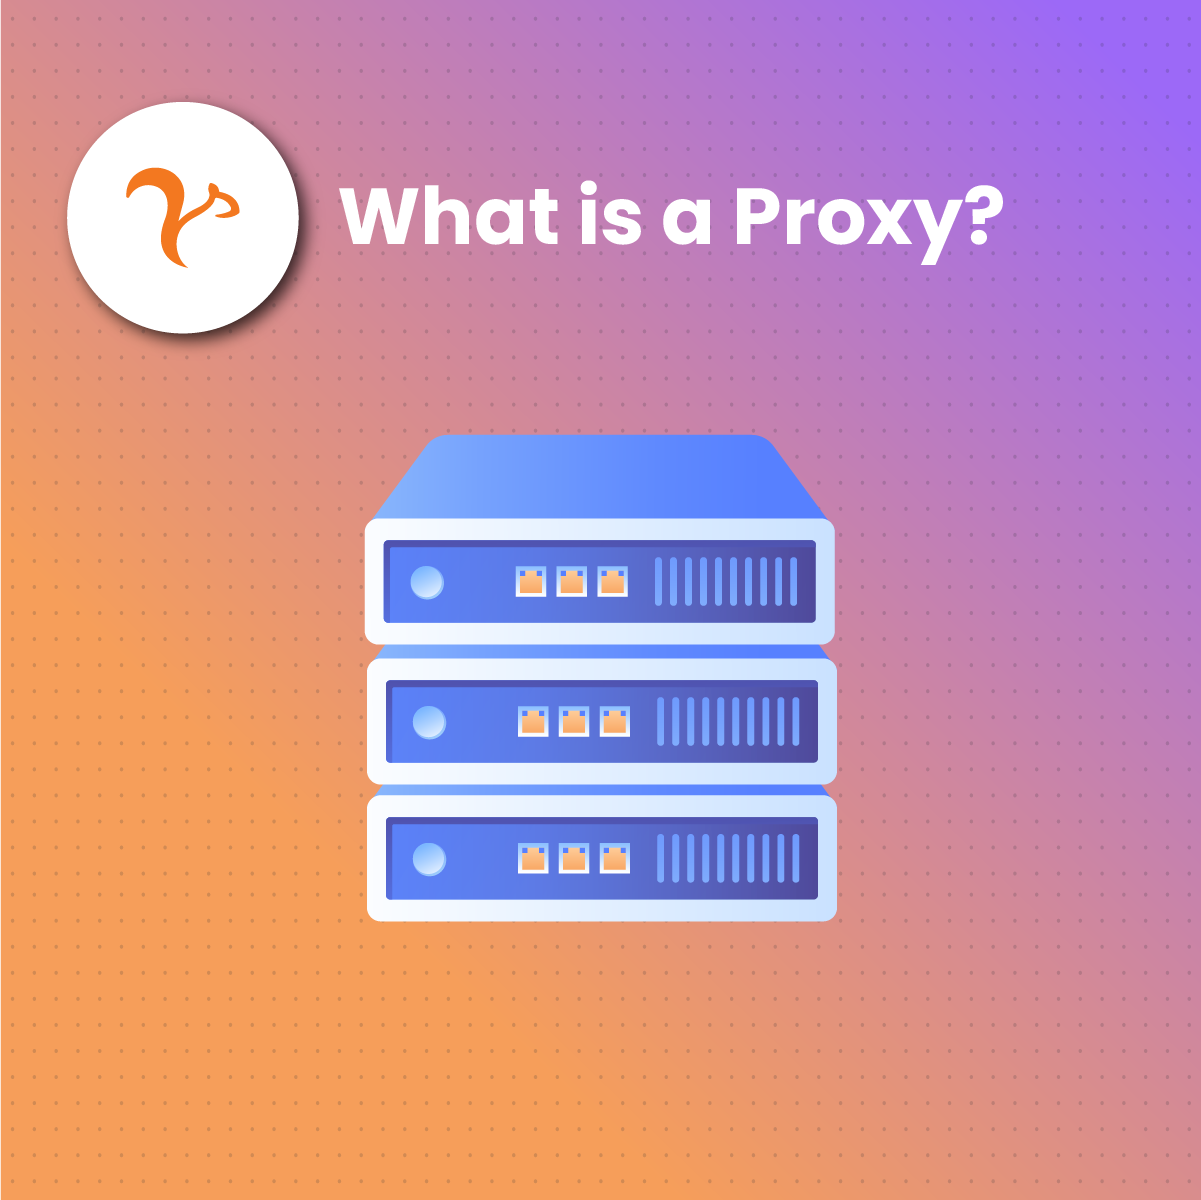 What is a Proxy?